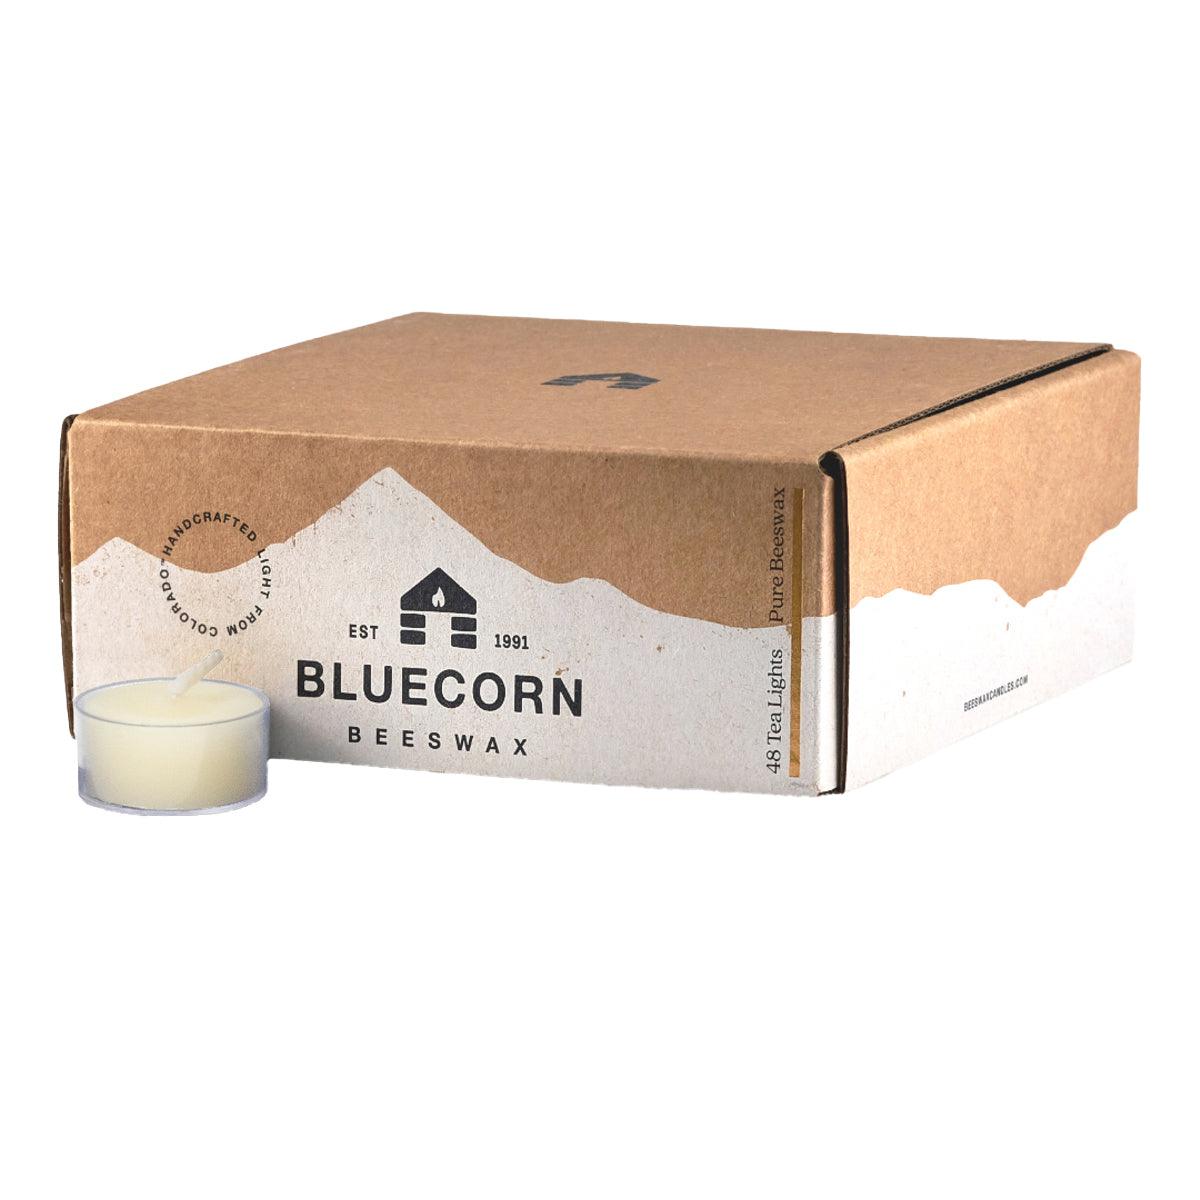 Bluecorn Beeswax 100% Pure Beeswax 48 Pack Ivory Tea Light in Clear cups. Picture features one Tea Light outside of Bluecorn branded Tea Light Box with a white background. Box features Bluecorn Beeswax name and logo, with an outline of Mt. Wilson in white printed on a 100% recycled kraft paper box. Tea lights will burn for about 5 hours each.